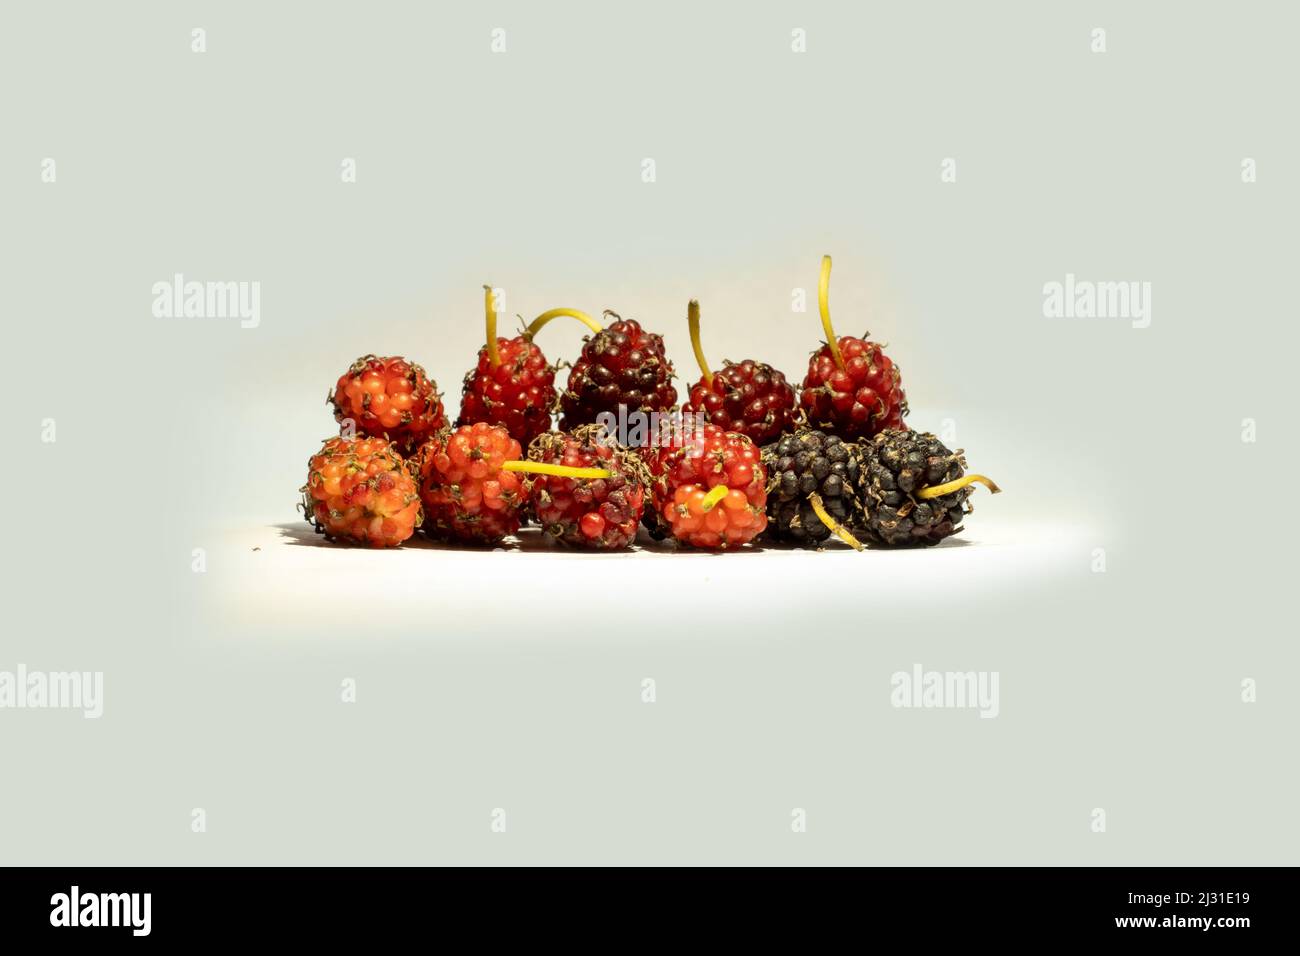 White to red-colored fruits of the mulberry tree resemble blackberries. Morus alba or mulberries on white background. Black mulberries are the fruit o Stock Photo